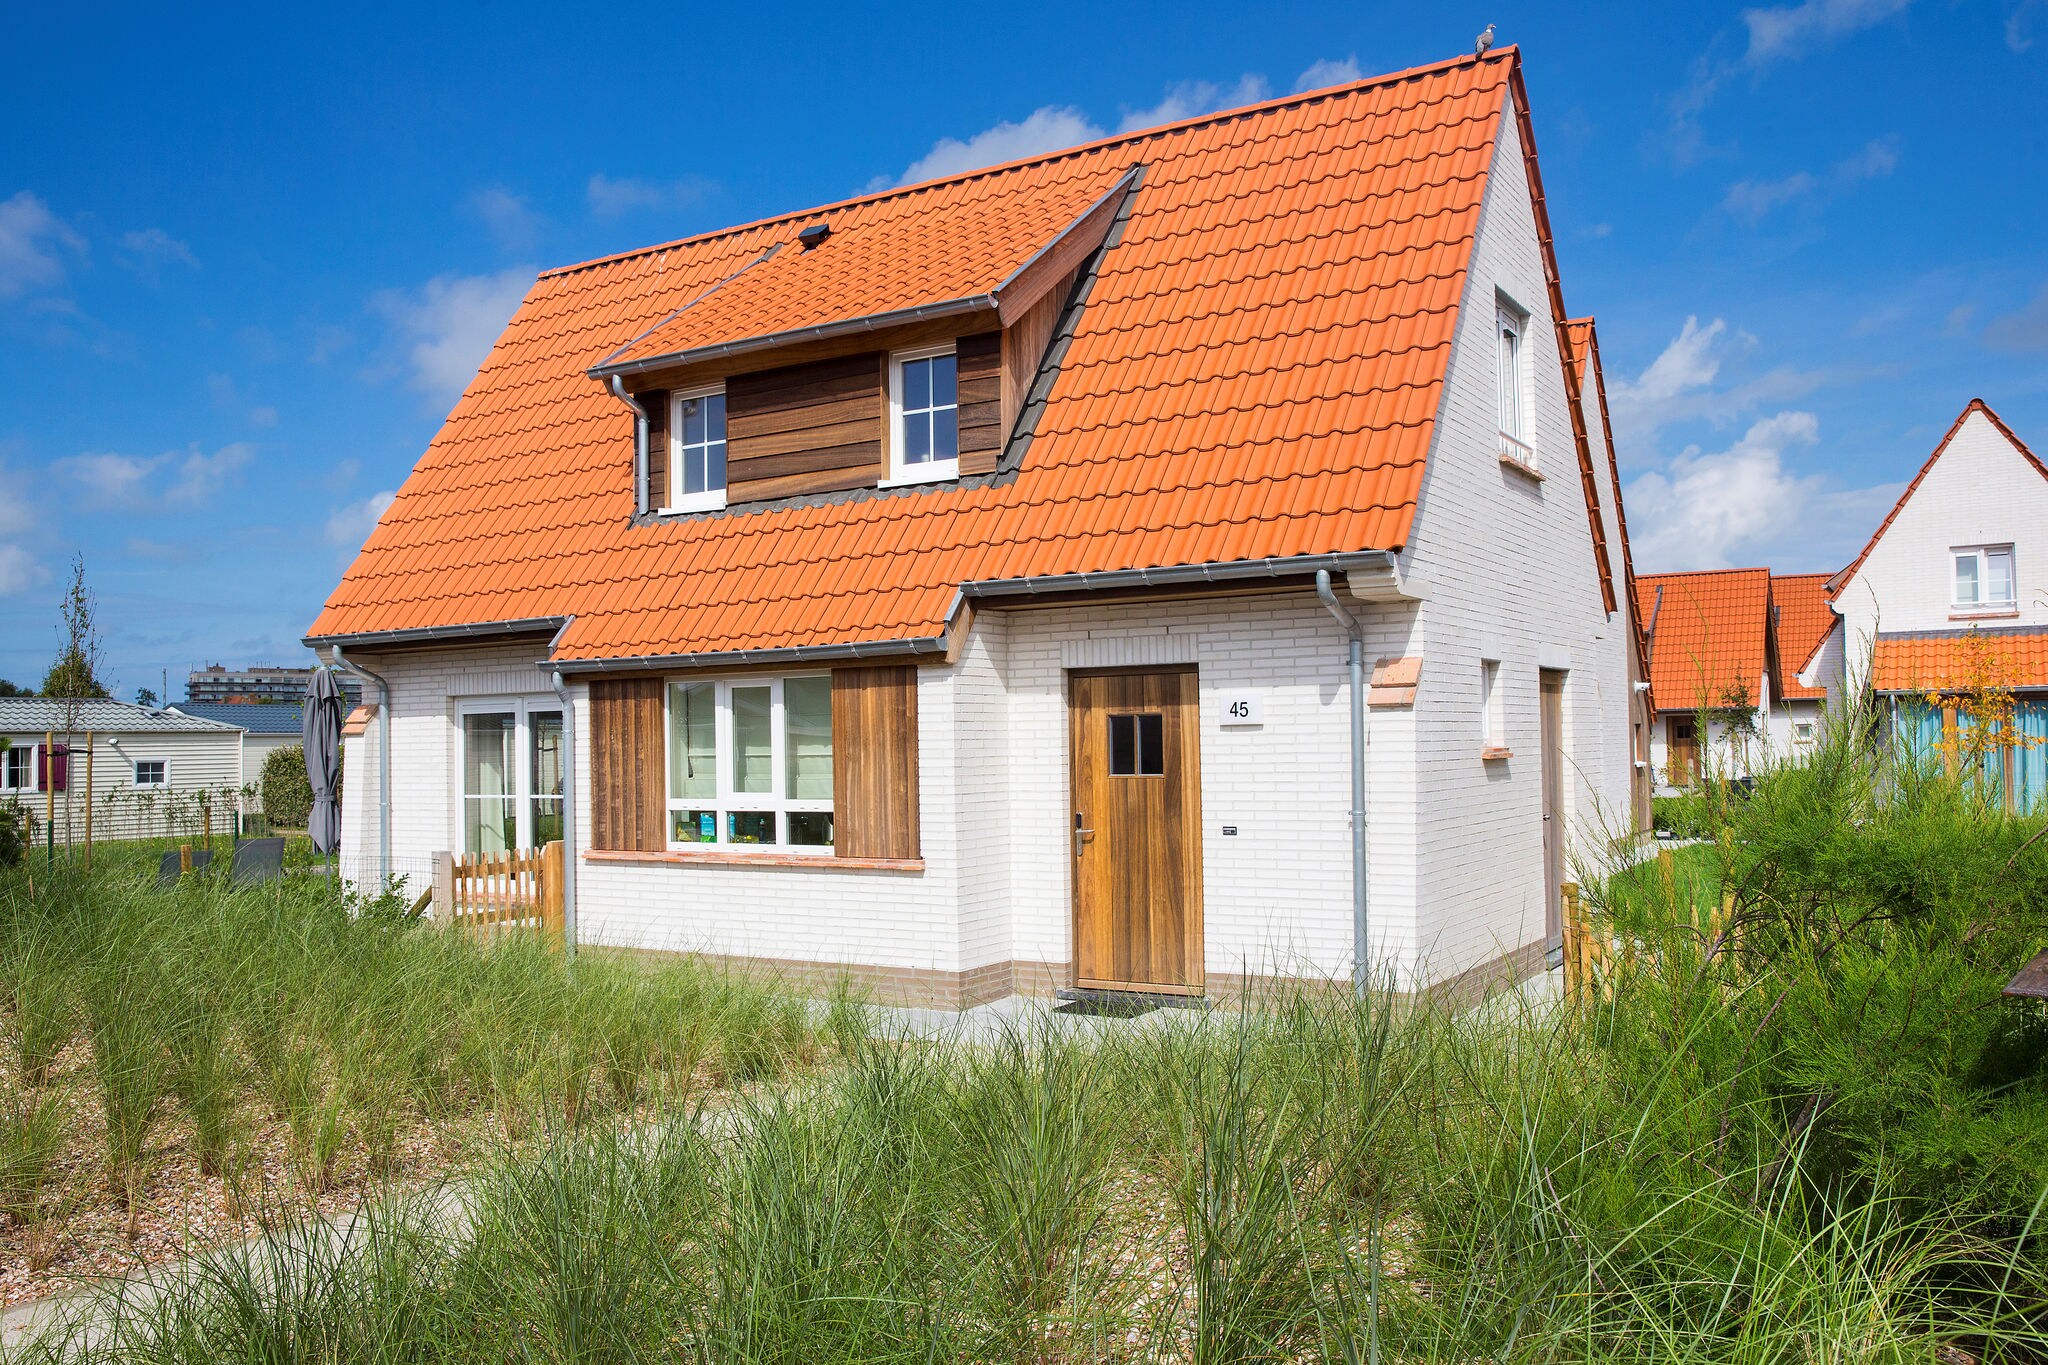 Villa, two bathrooms and a washing machine, 10km from Ostend